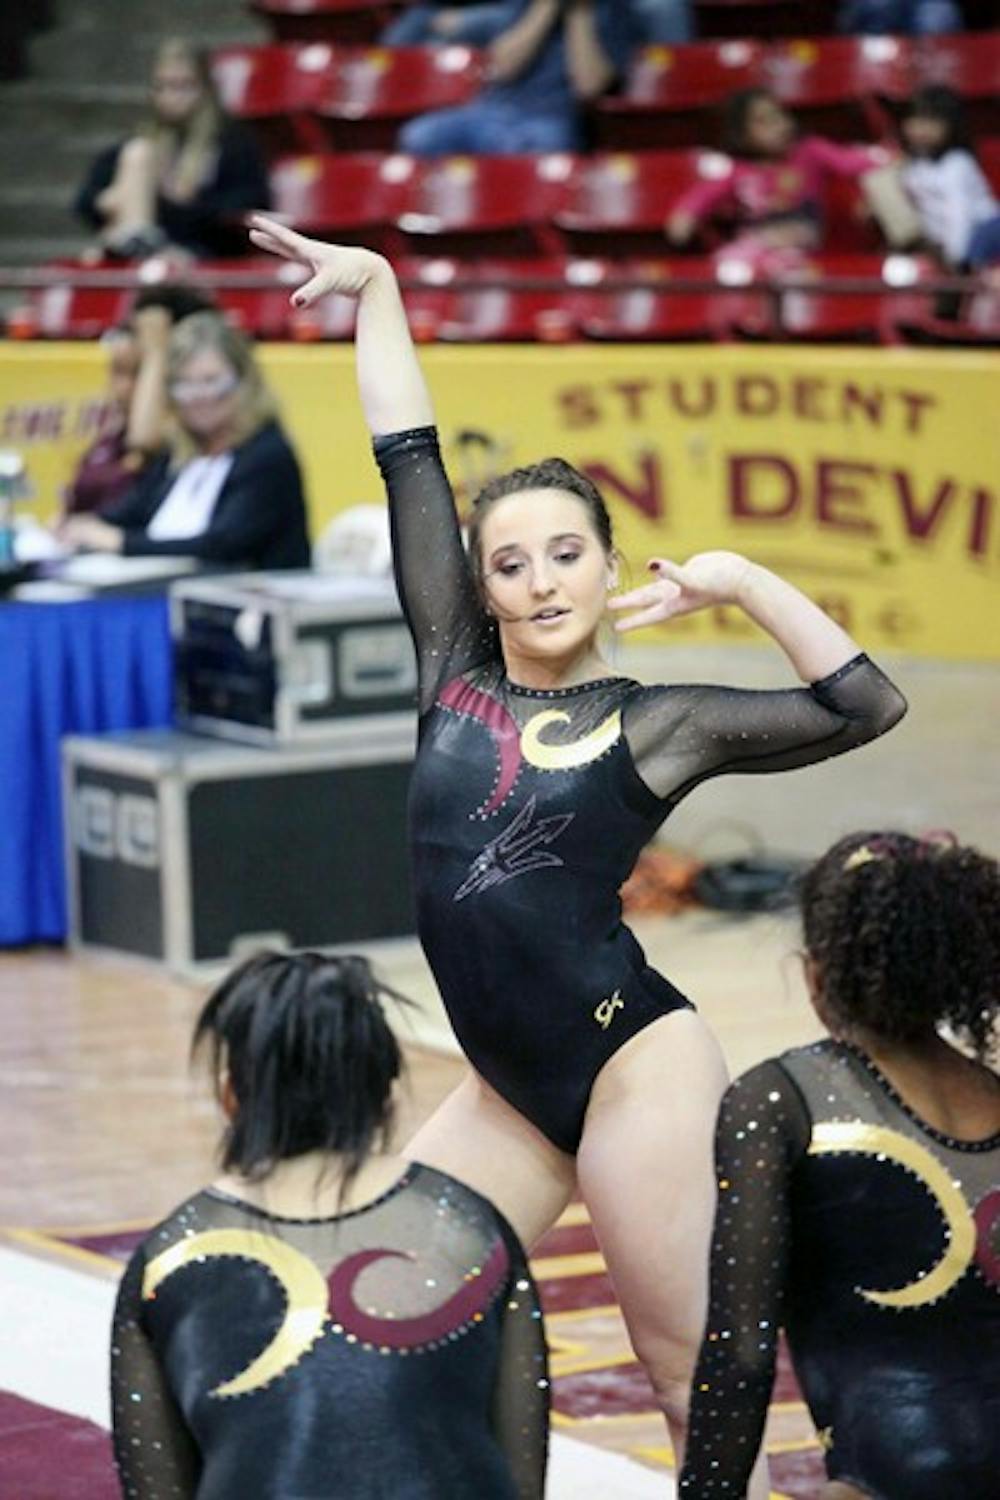 Sophomore Samantha Seaman is cheered on by her teammates during her floor routine in a meet against Cal on Jan. 20. The young Gym Devils continue to progress in the early stages of the season. (Photo by Beth Easterbrook)